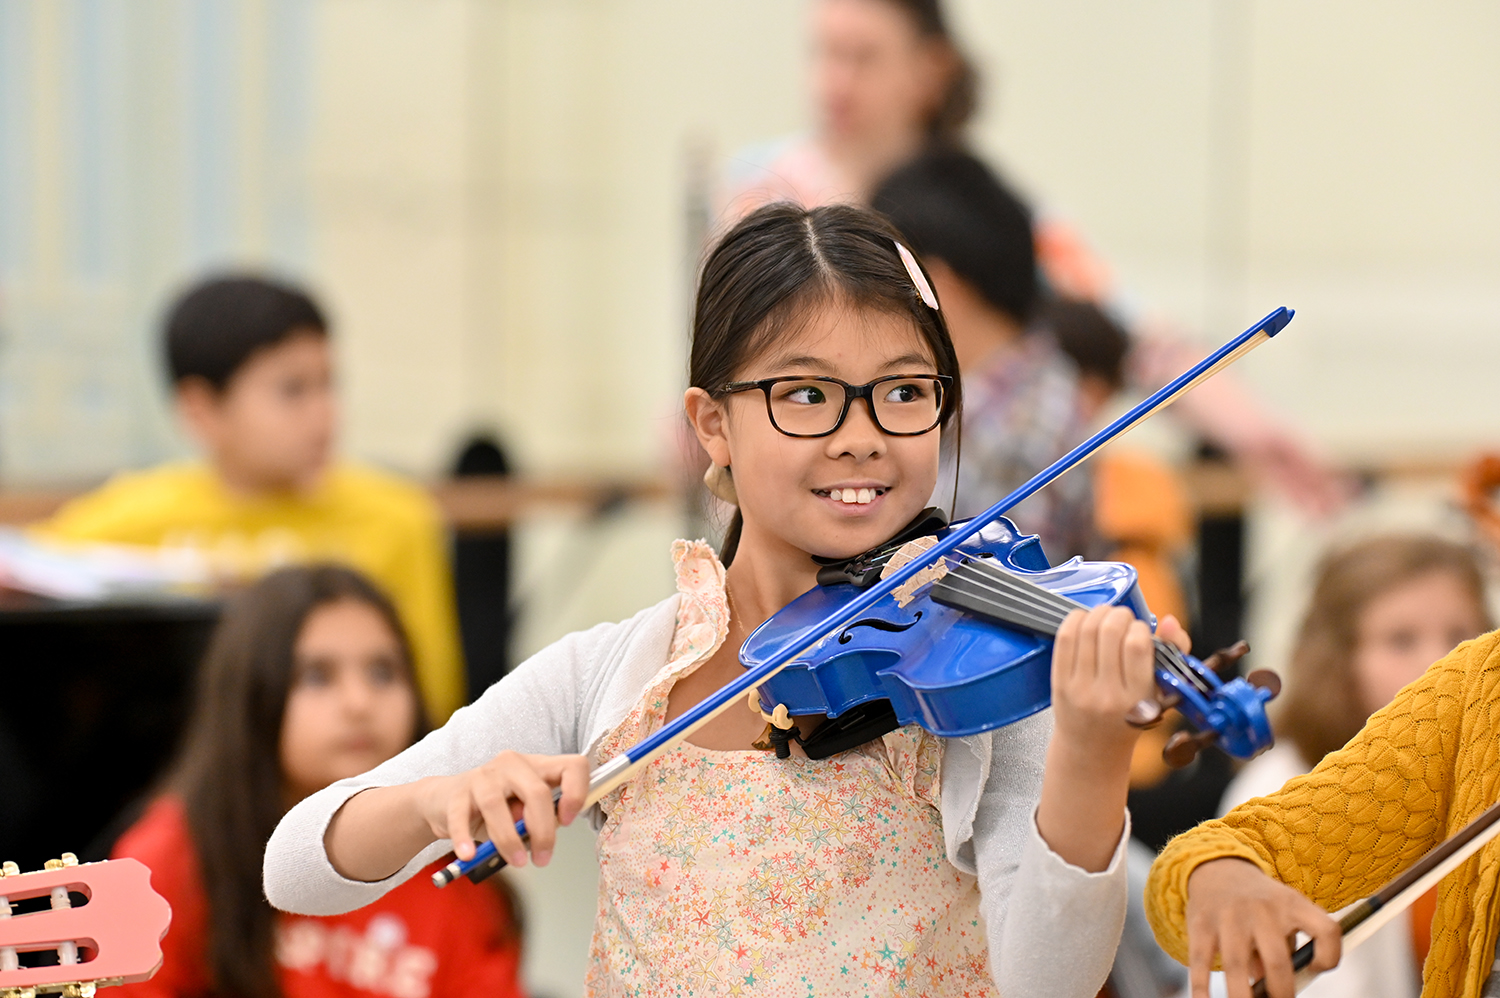 A little girl smiling and playing on a blue violin with other out of focus children in the background